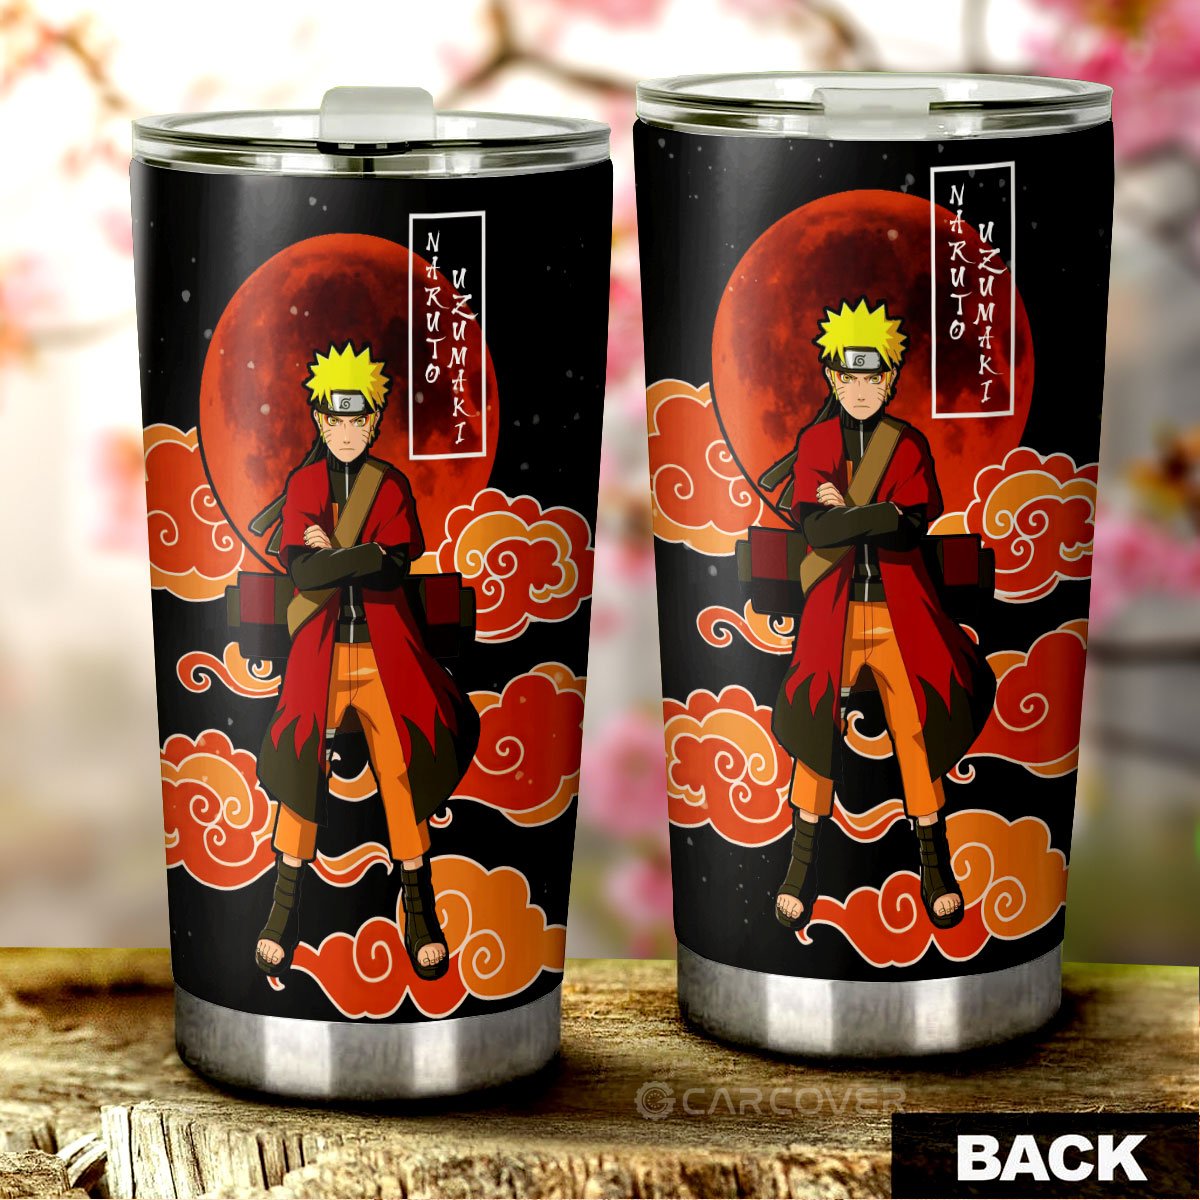 Sage Tumbler Cup Custom Anime Car Accessories - Gearcarcover - 3